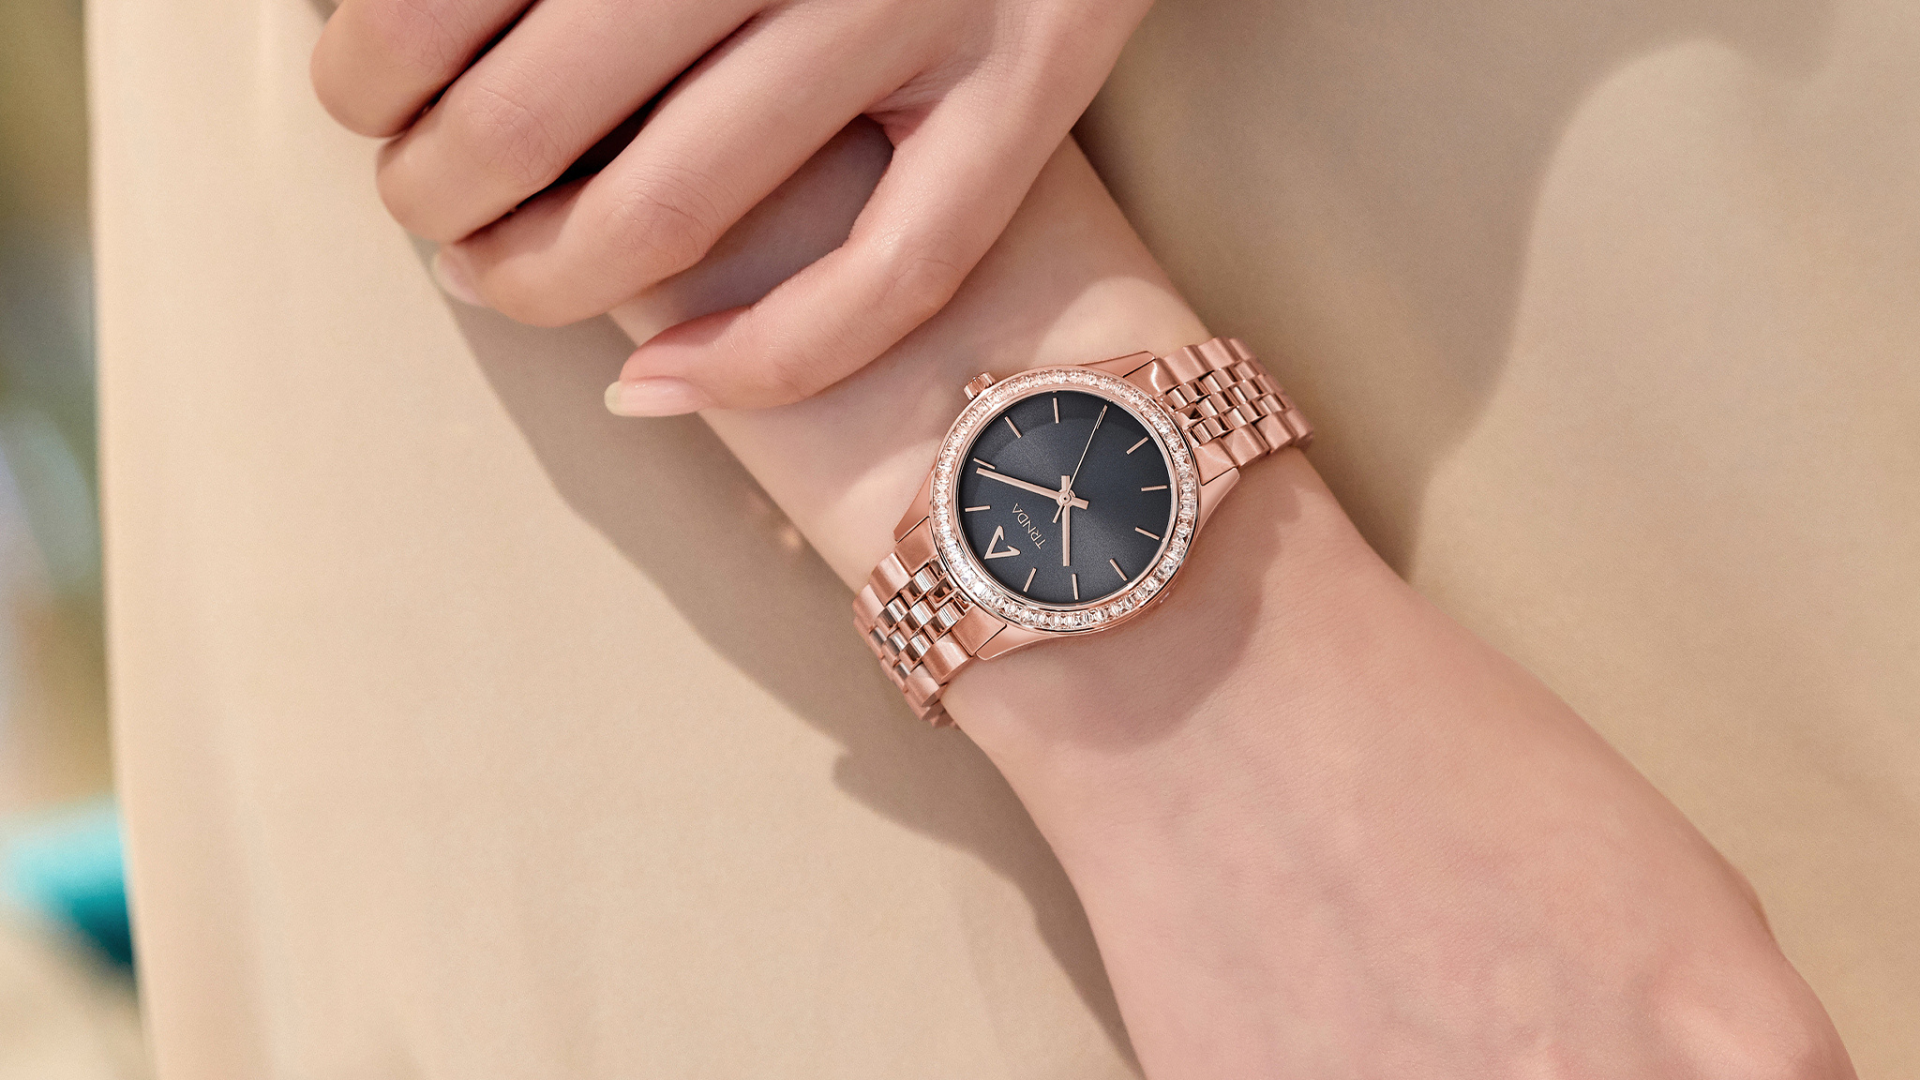 Chic TRNDA women's watch in a superb rose gold finish, adorned with shiny stones